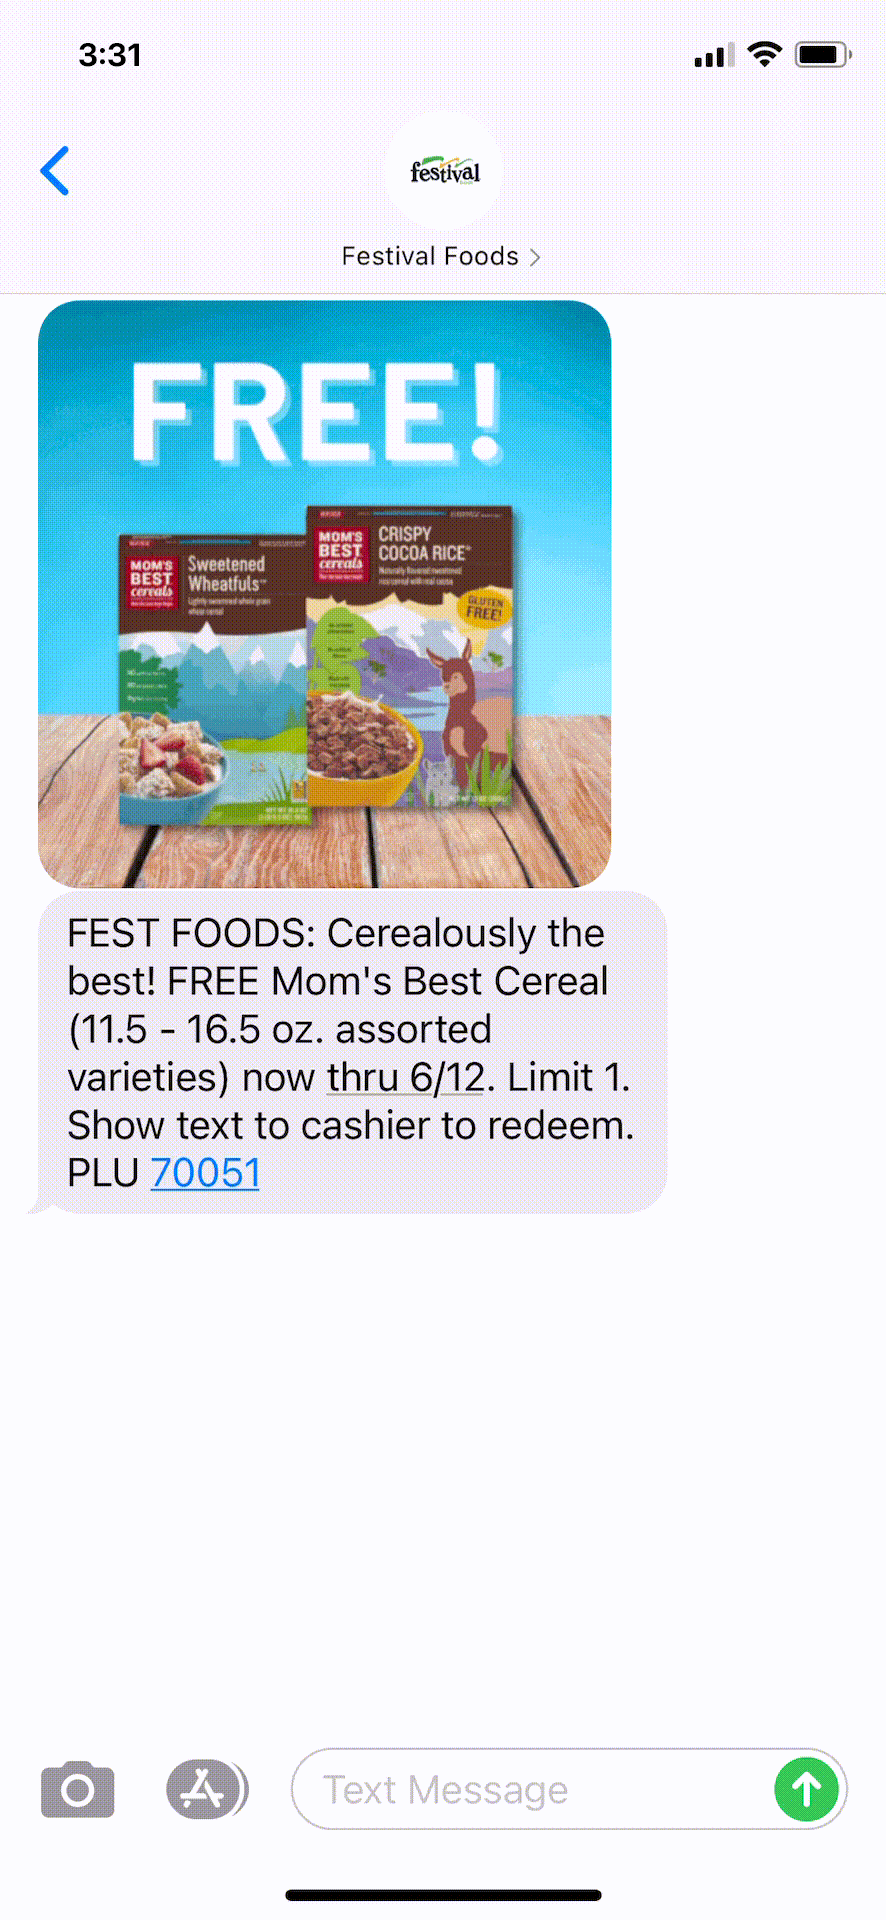 Festival-Foods-Text-Message-Marketing-Example-06.11.2021